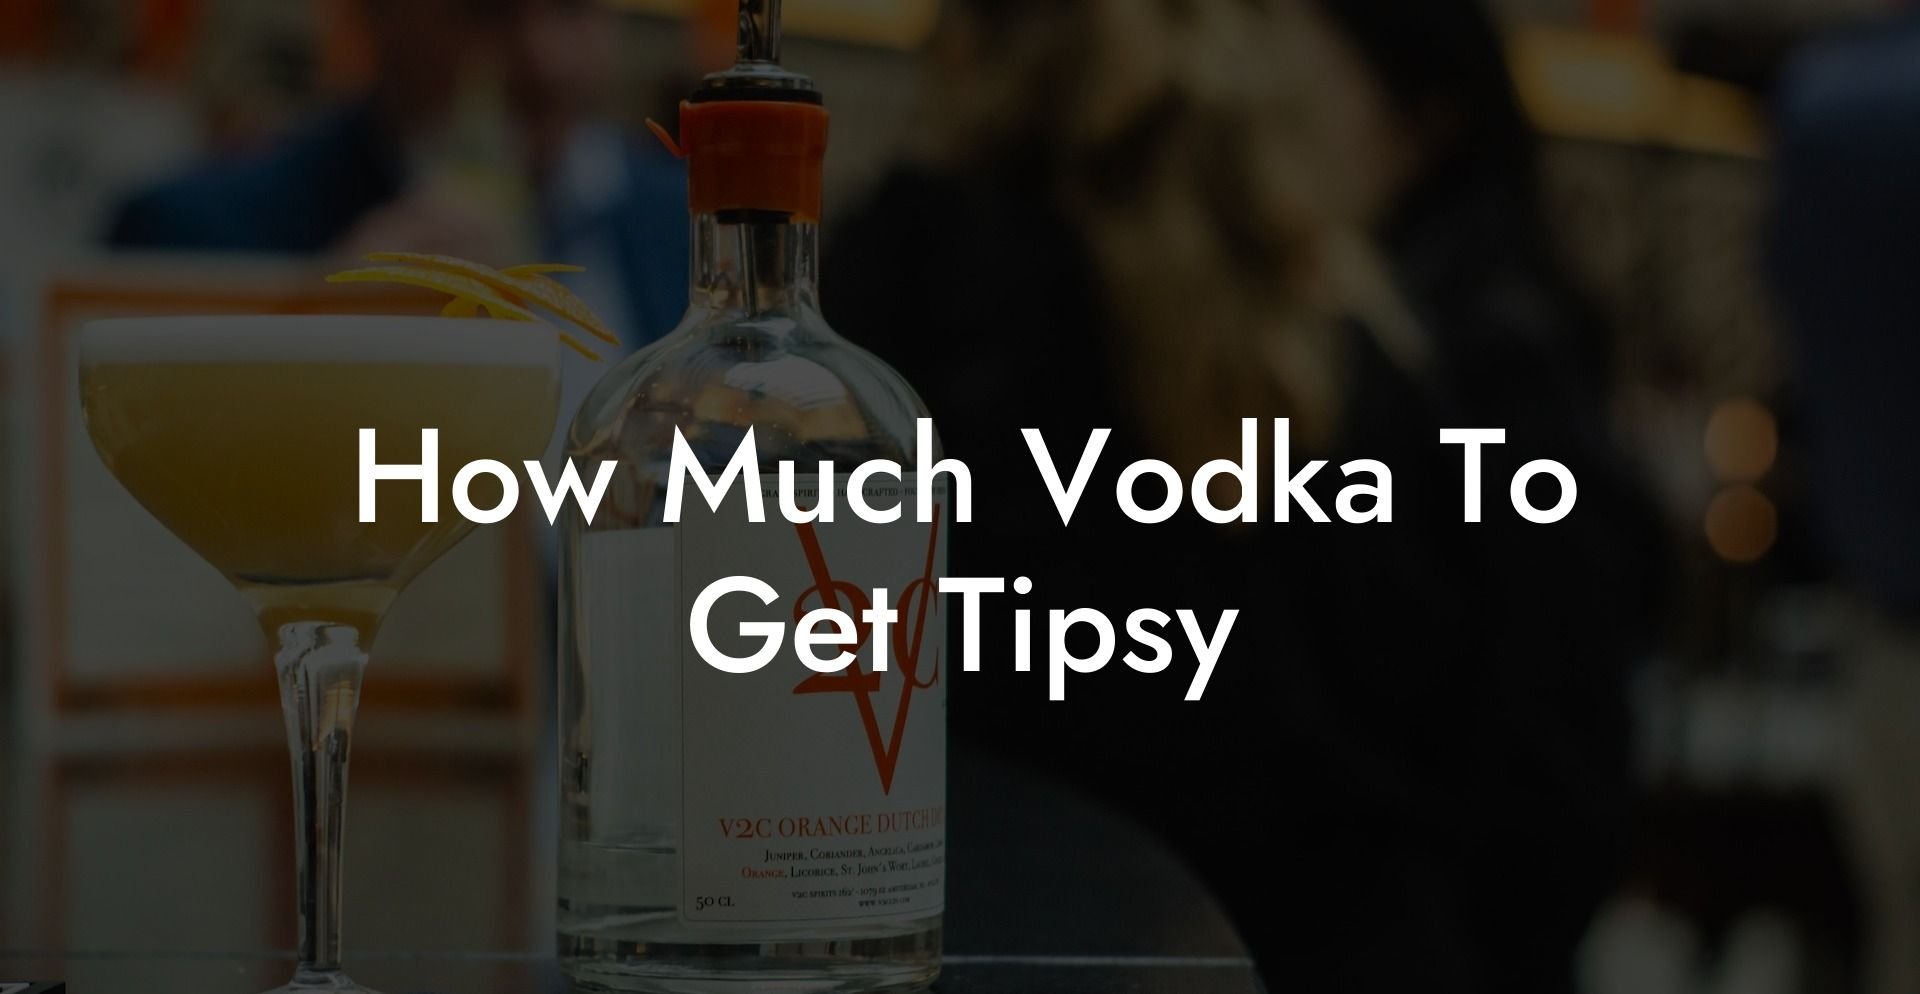 How Much Vodka To Get Tipsy